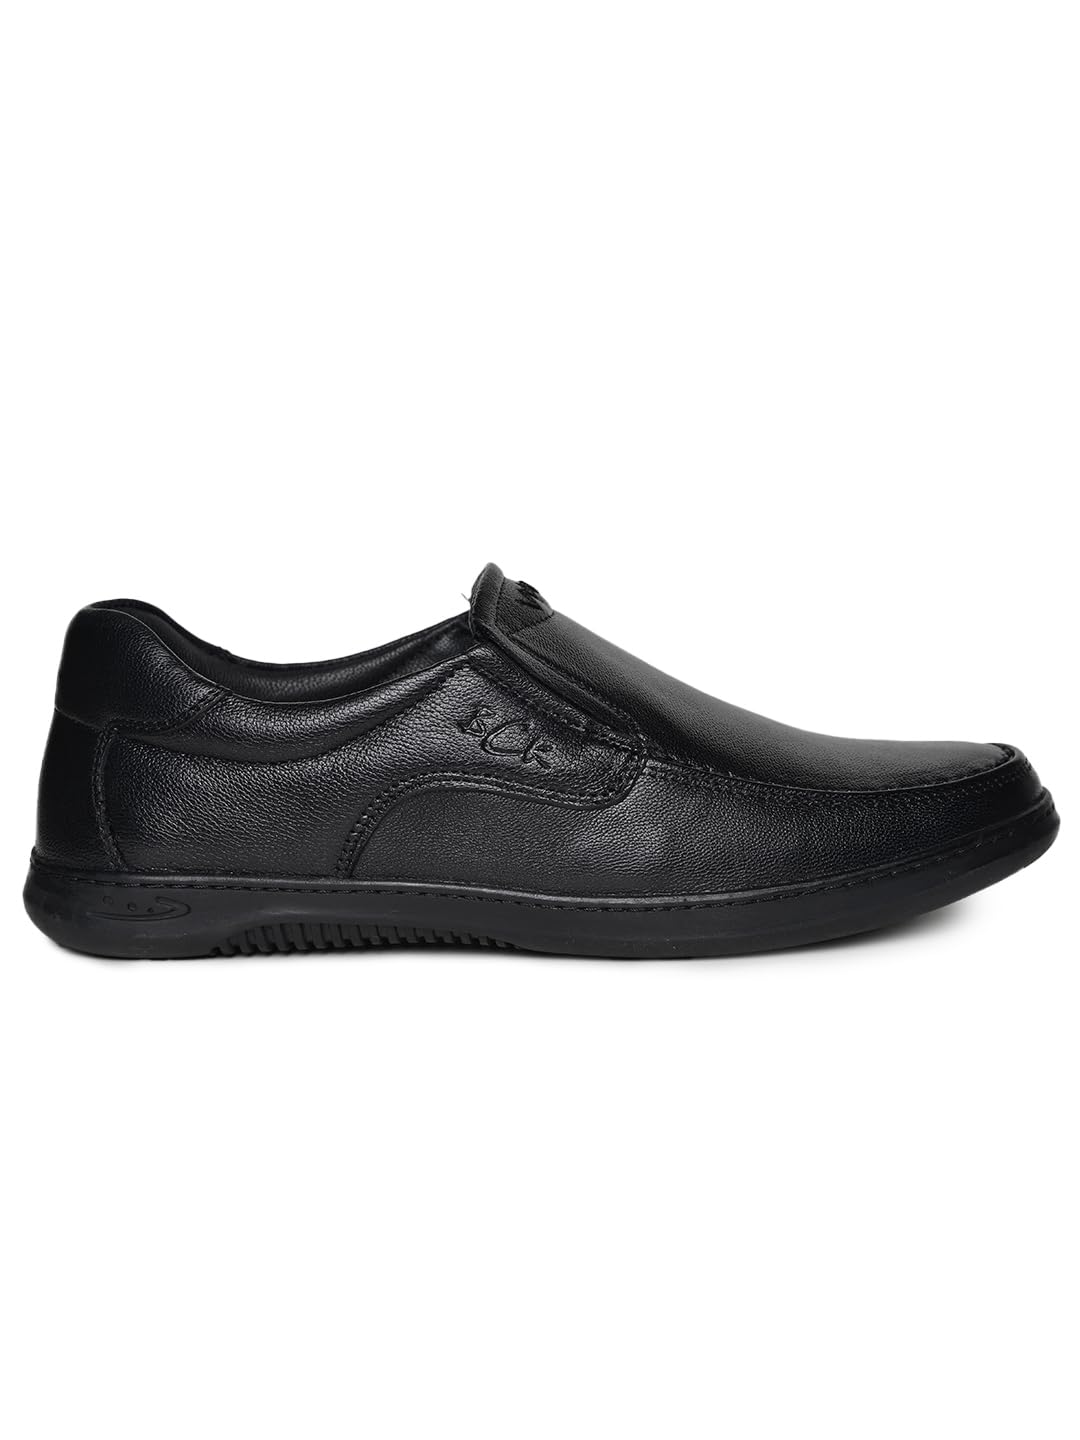 Errol Genuine Leather Casual Shoes for Mens (Black, 40) 